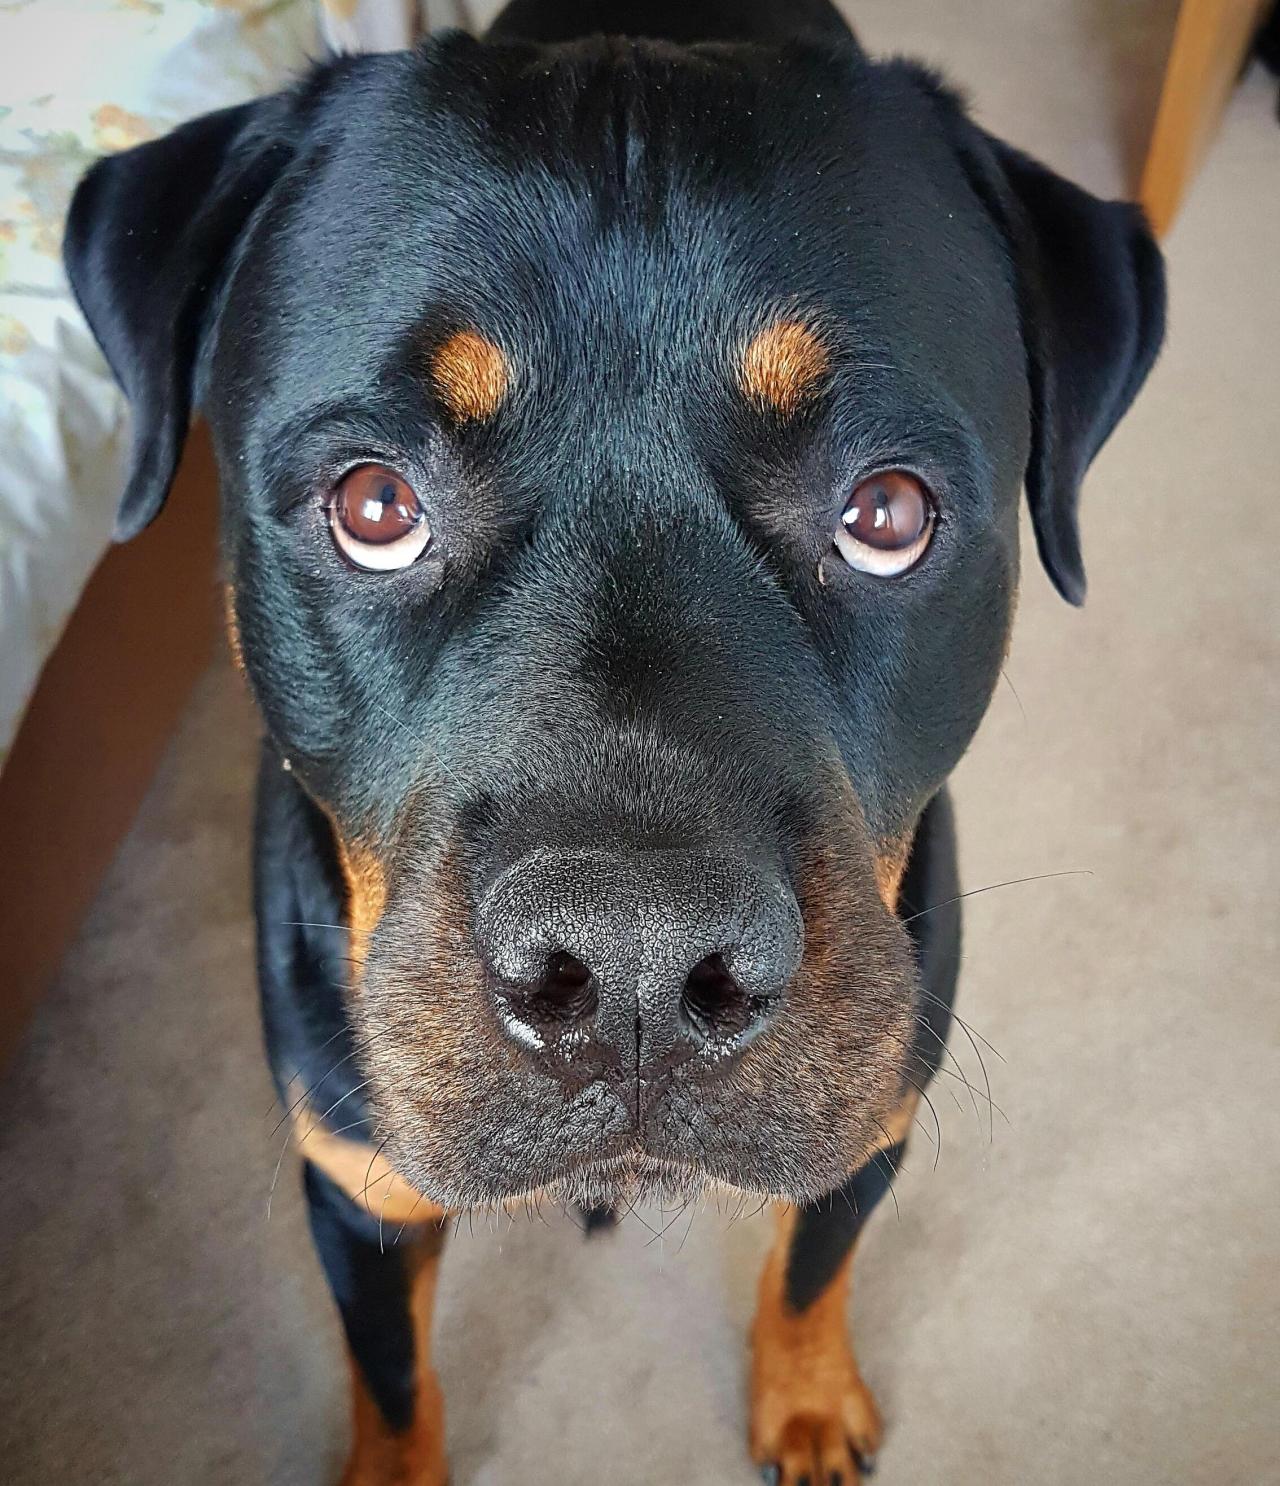 Got a new phone so had to test the camera out on my handsome Rottweiler (Source: http://ift.tt/2dl7Pjo)